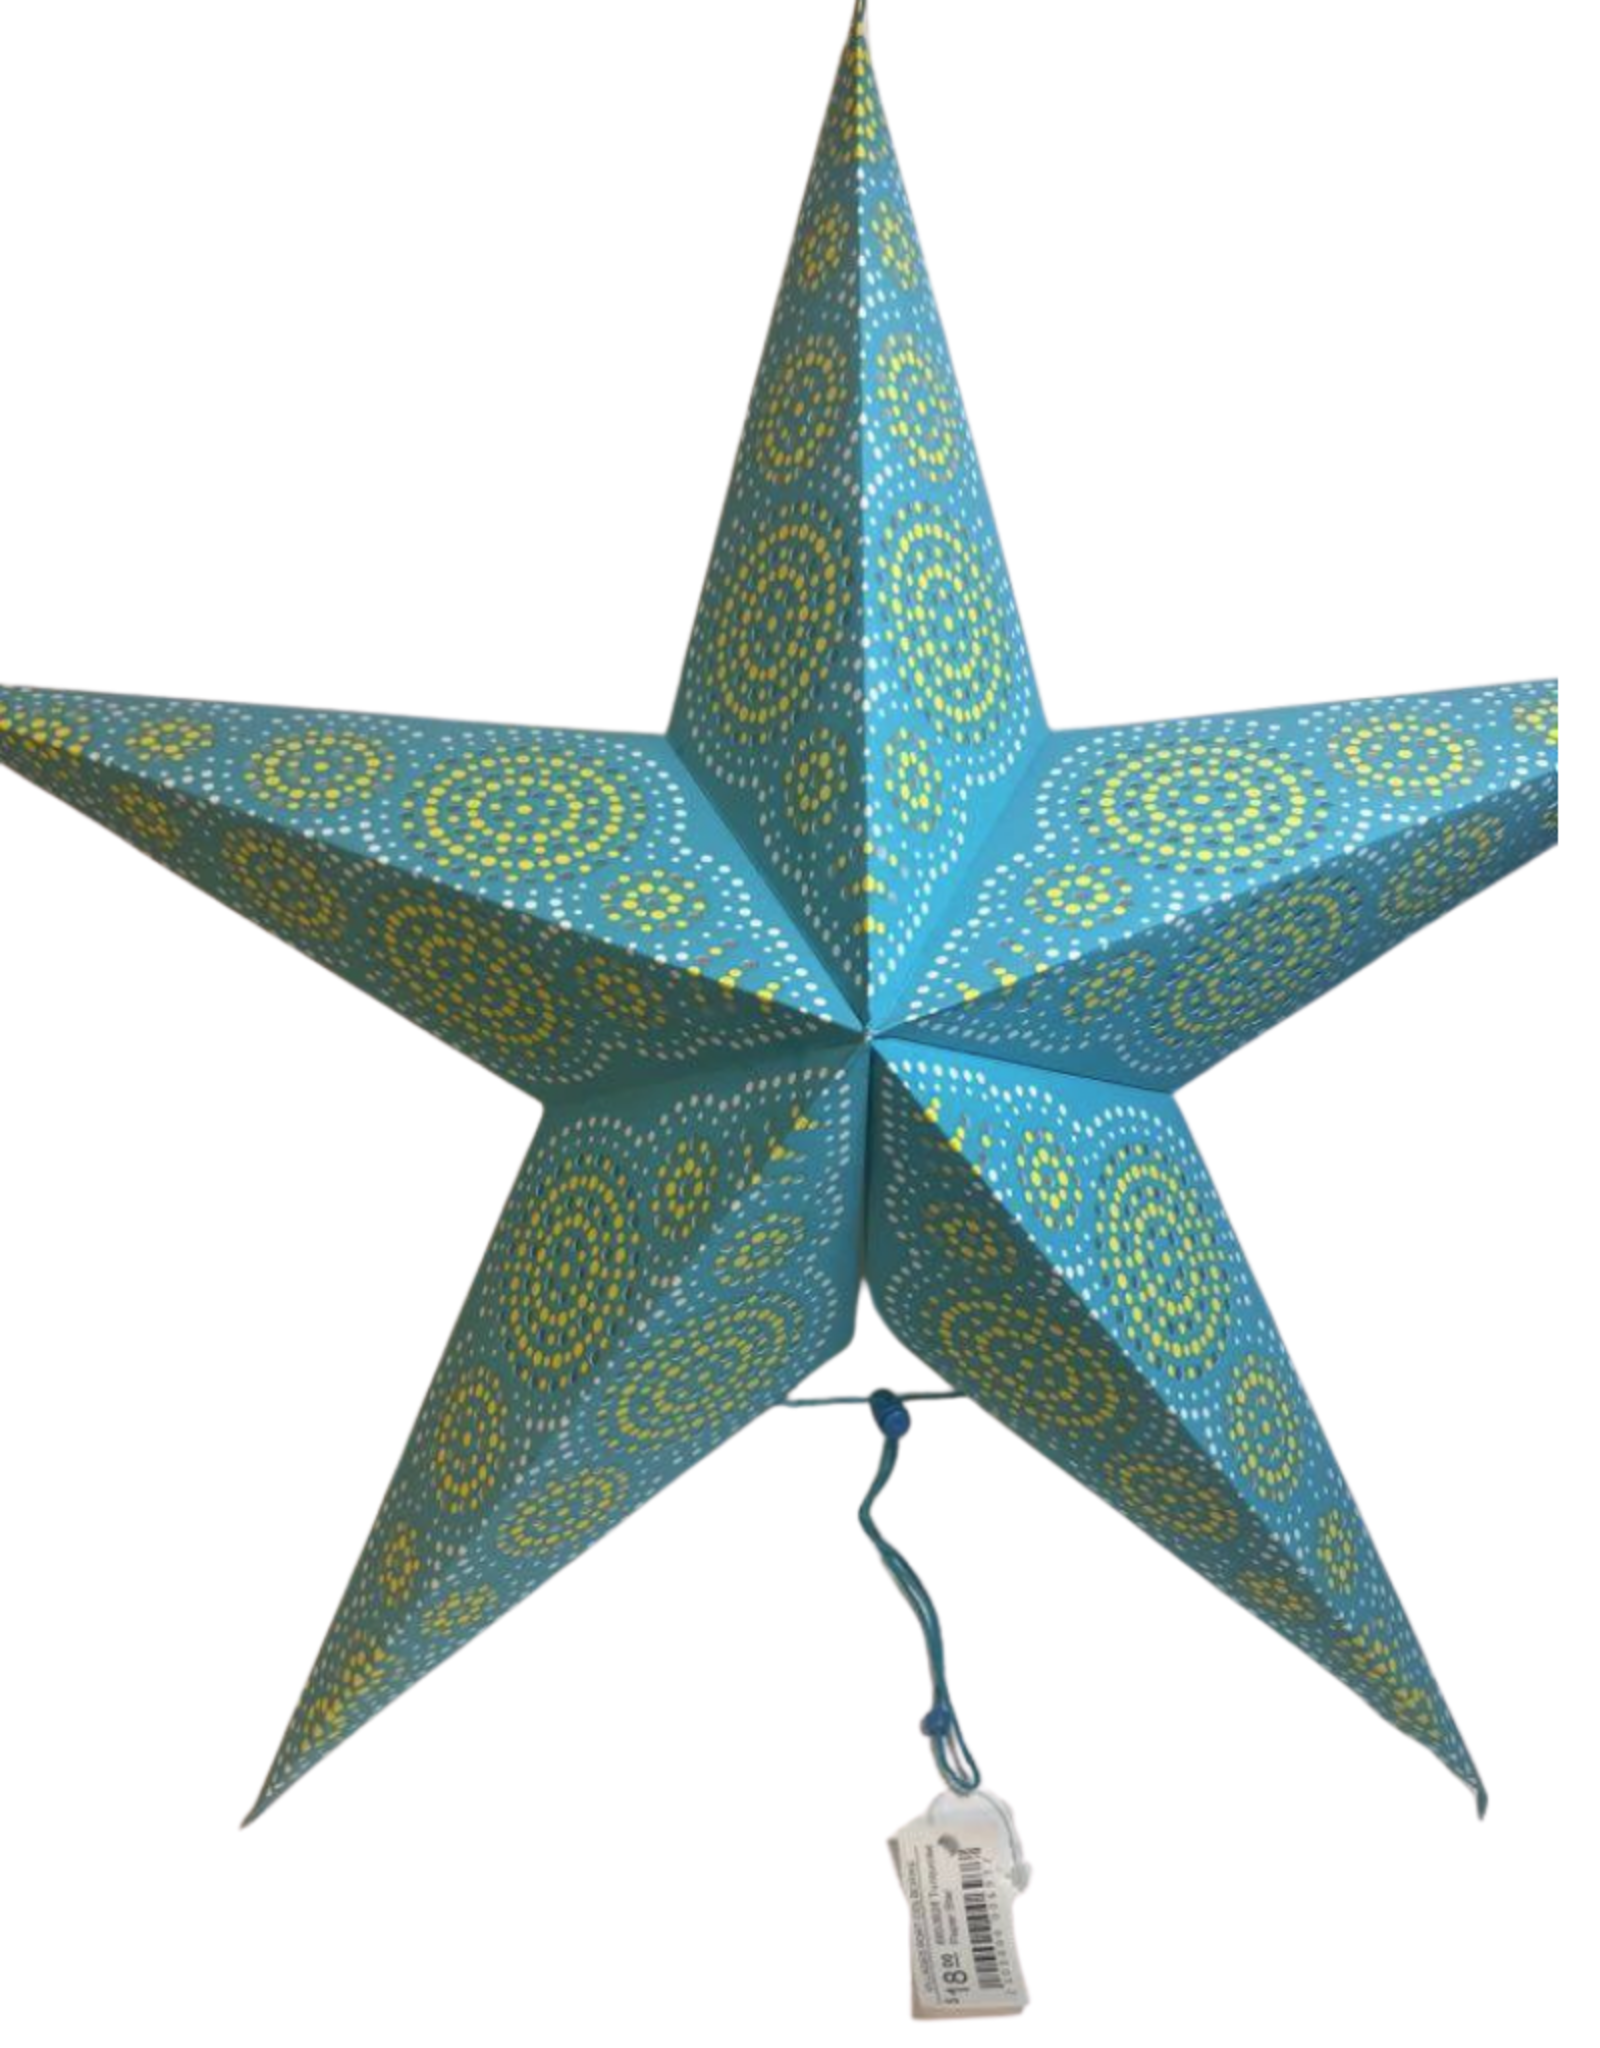 Ten Thousand Villages Turquoise Paper Star Ornament - India